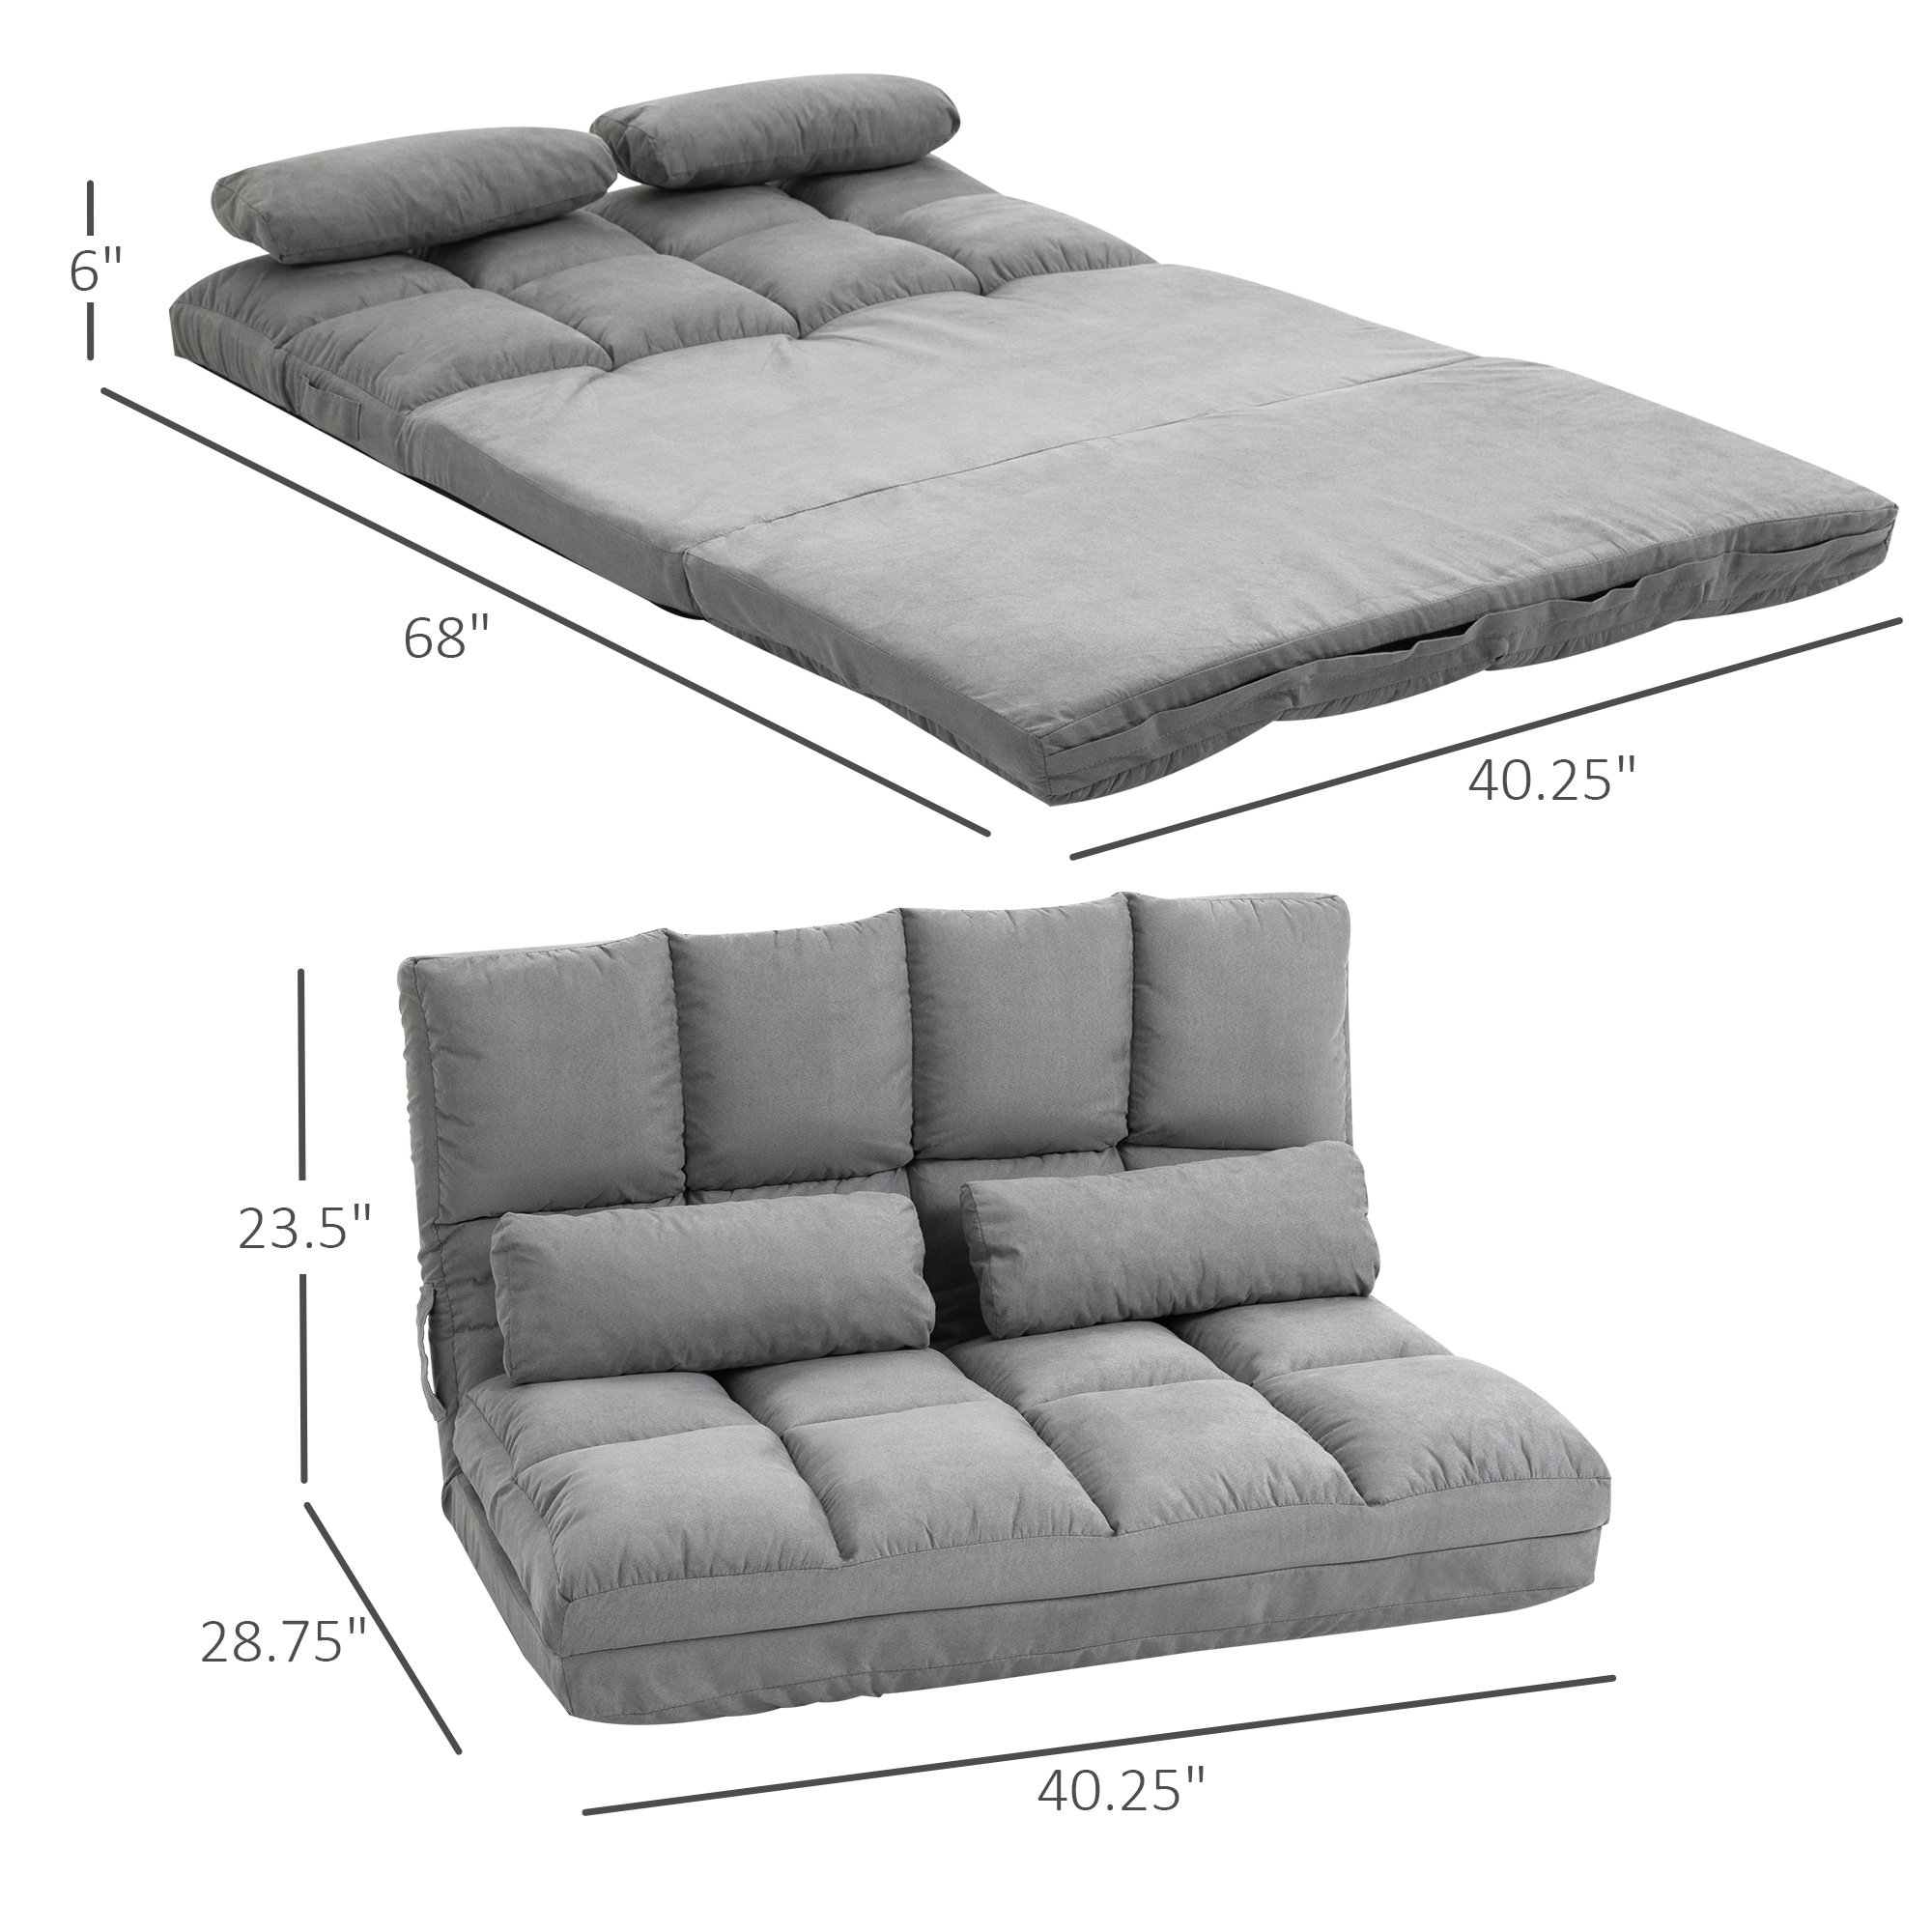 https://ak1.ostkcdn.com/images/products/is/images/direct/80bec597d96b0b46f8d7756bccd70f05b4e6ef13/HOMCOM-Convertible-Floor-Sofa-with-7-Position-Adjustable-Backrest%2C-Thick-Padding%2C-Metal-Frame-and-2-Pillows.jpg